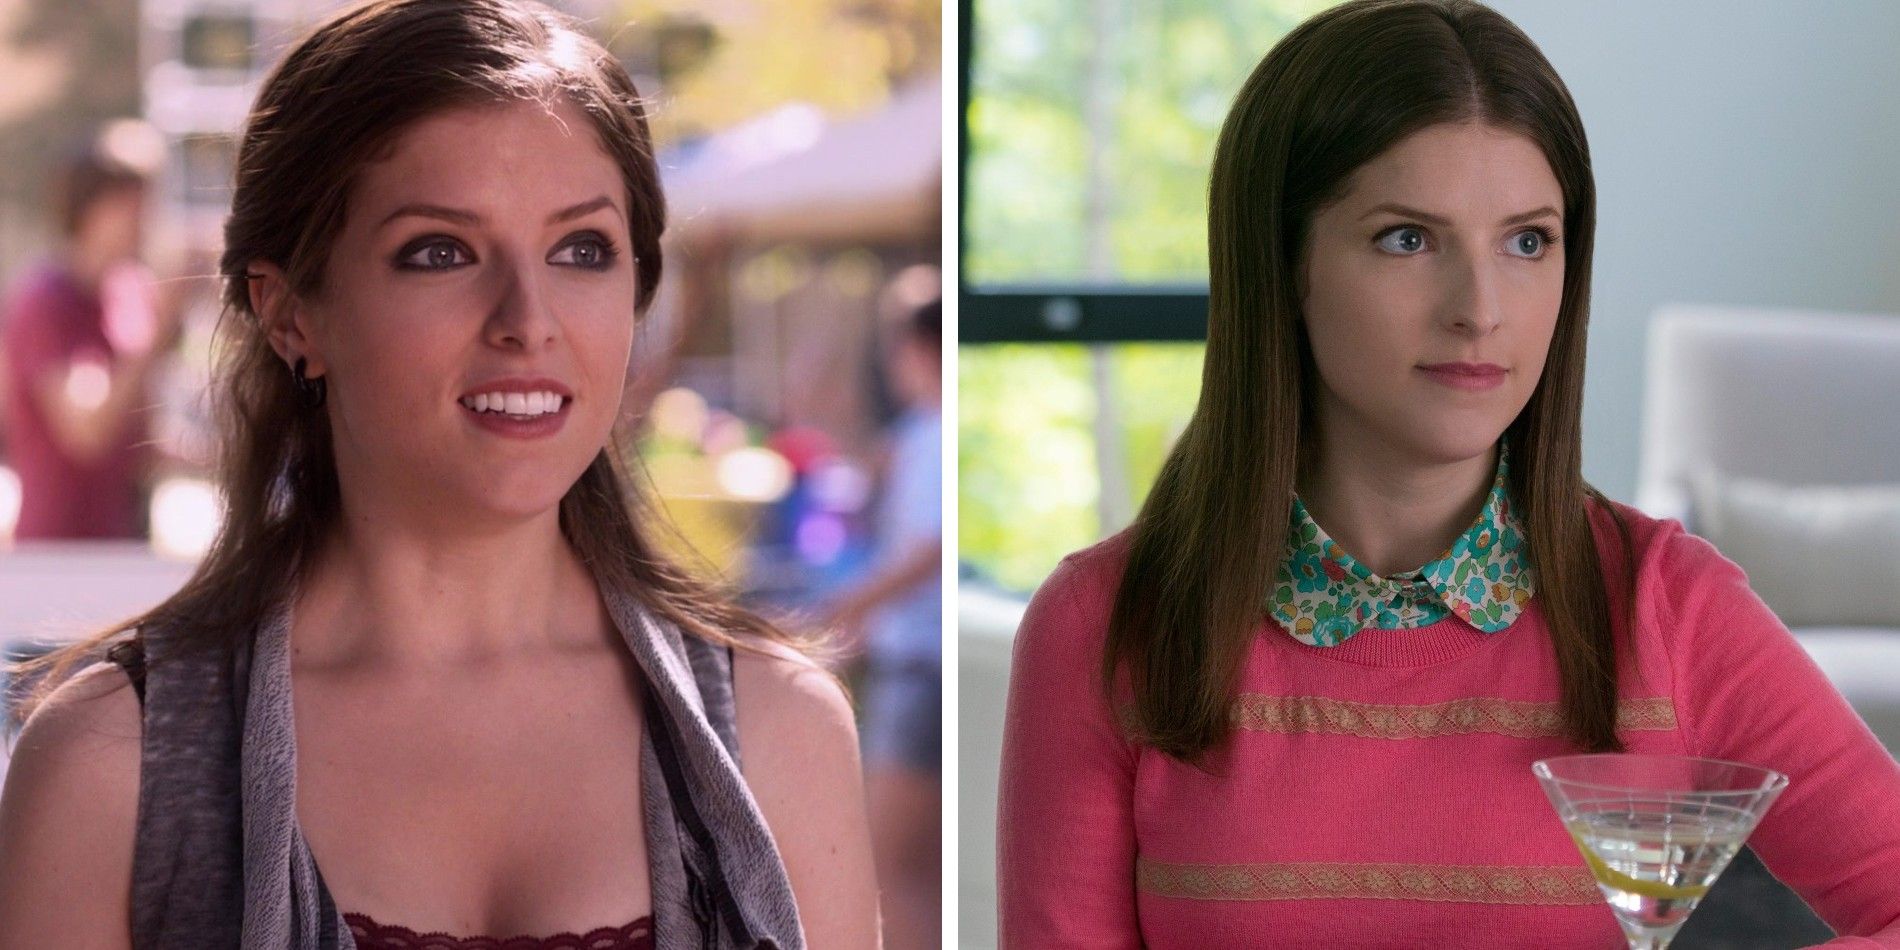 Anna Kendrick in Pitch Perfect and A Simple Favor